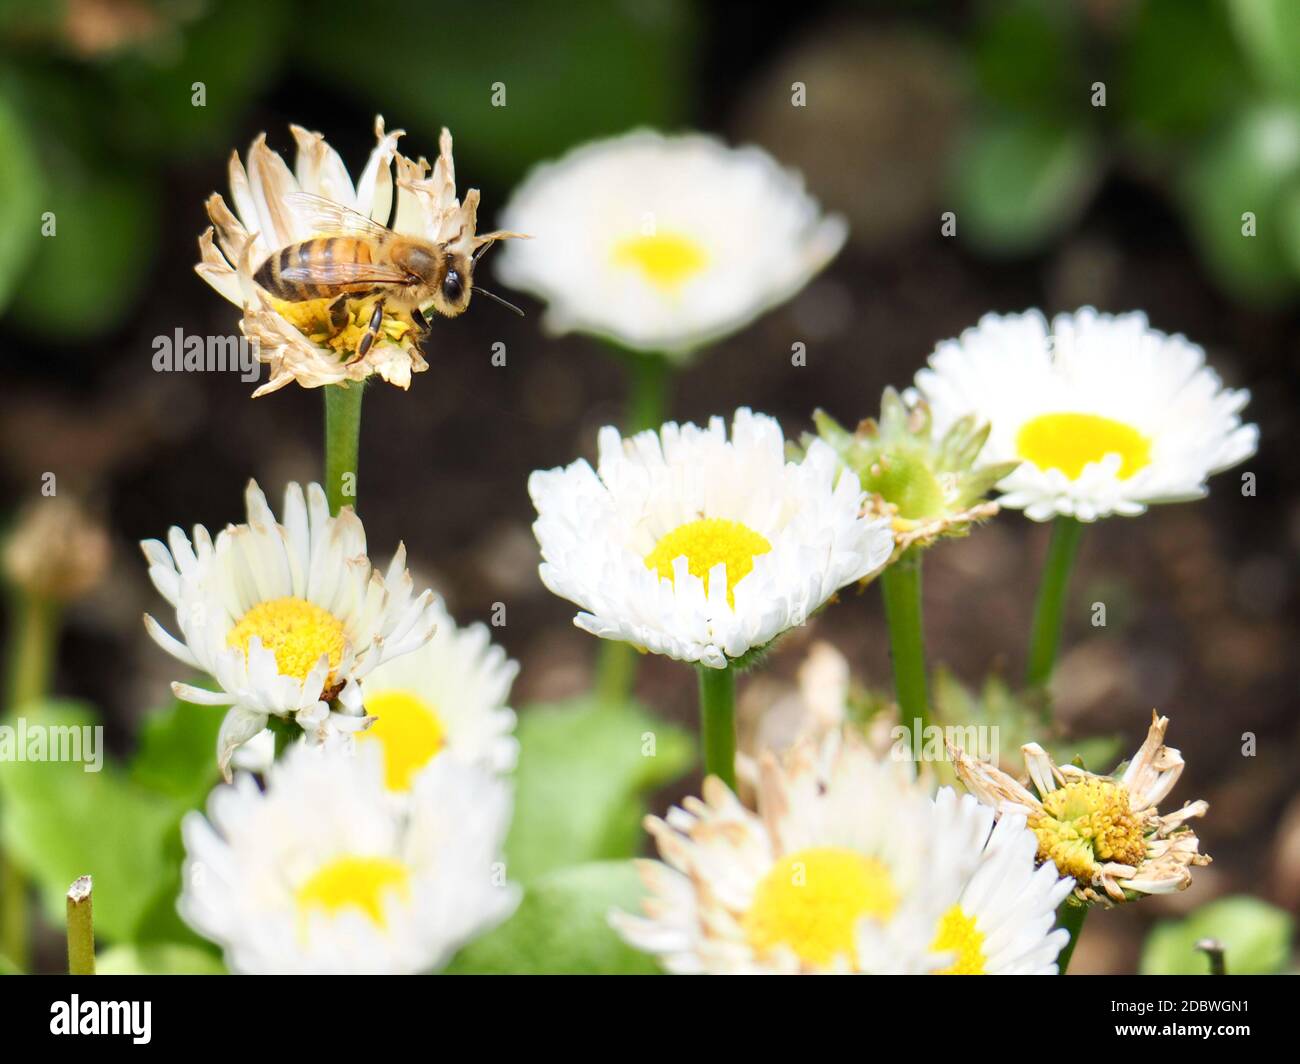 Busy Bee Working on Flowers Stock Photo